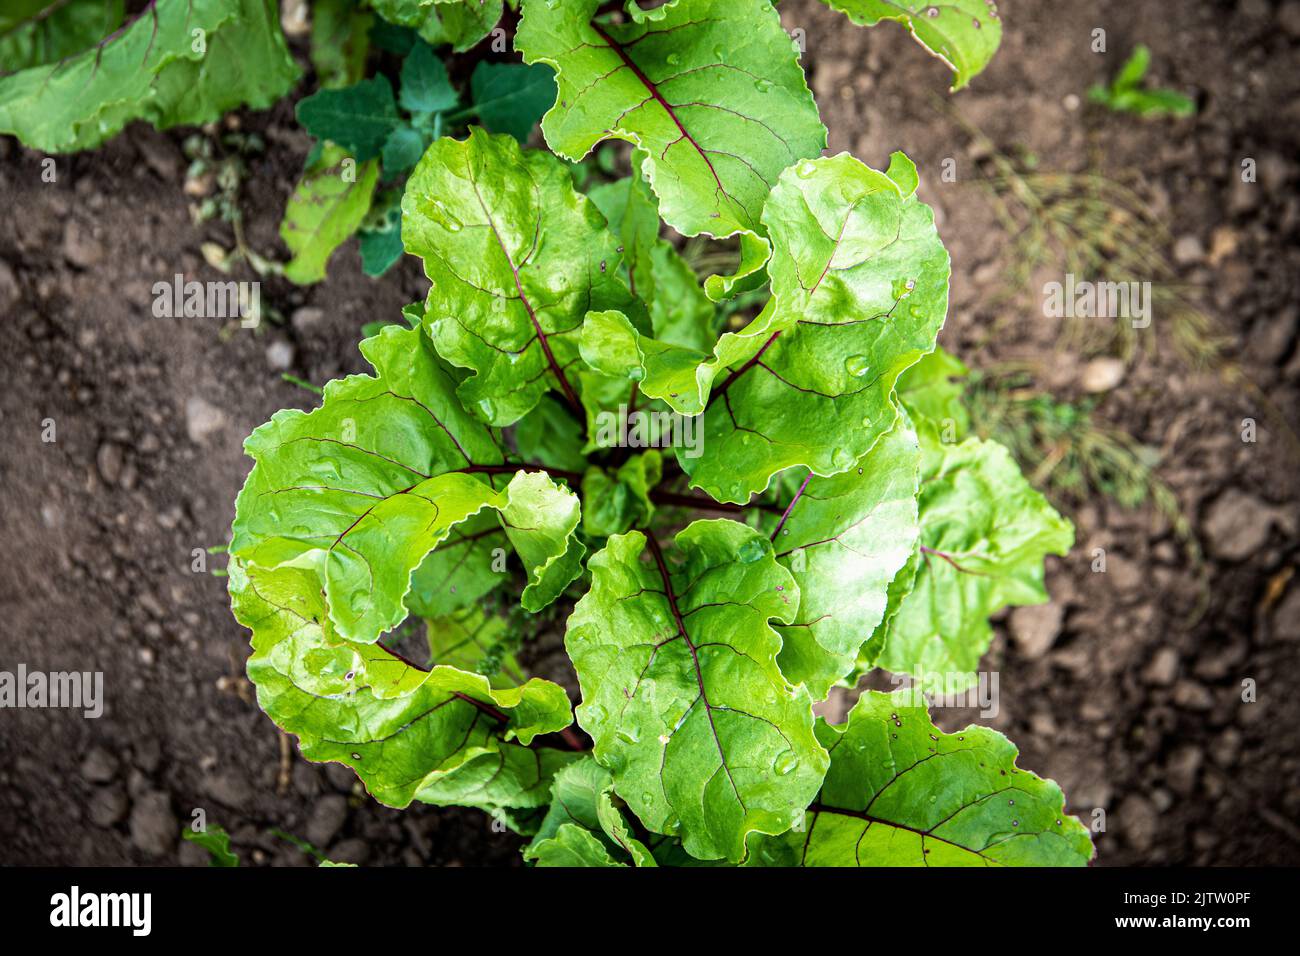 Beets grow in the garden. Fresh and bright green leaves. Vitamins and ecological food. Stock Photo